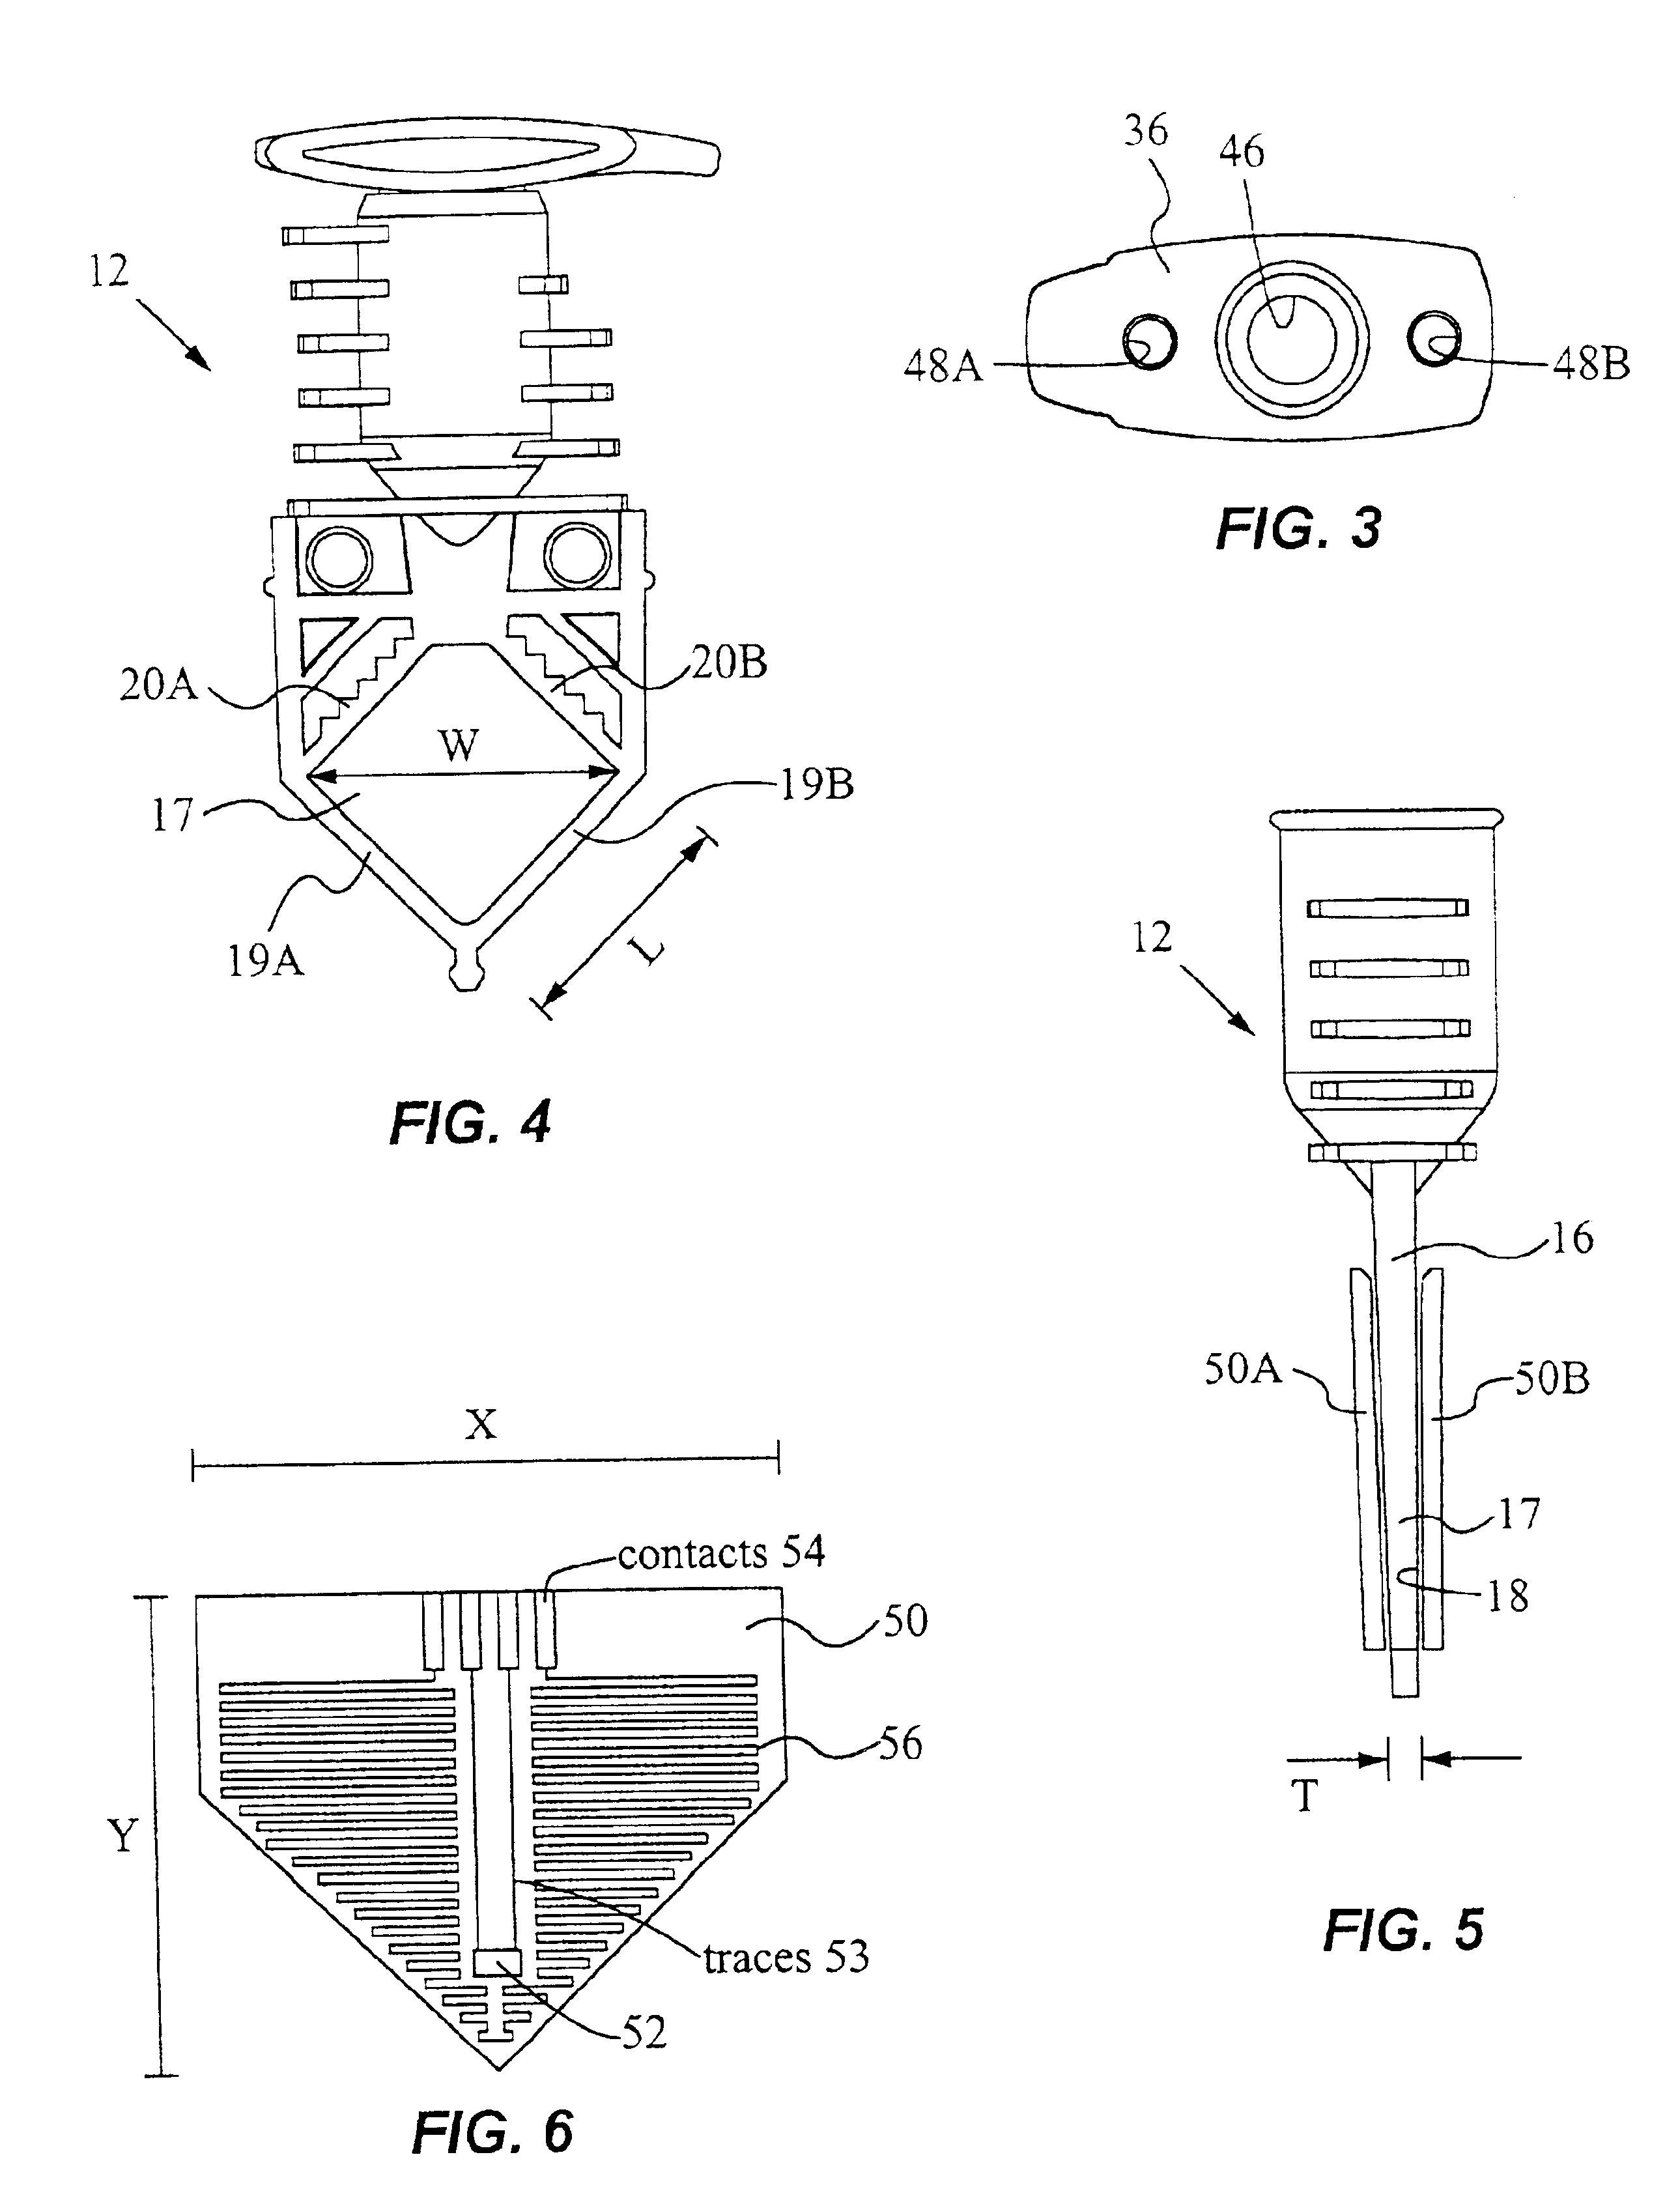 Apparatus for analysis of a nucleic acid amplification reaction